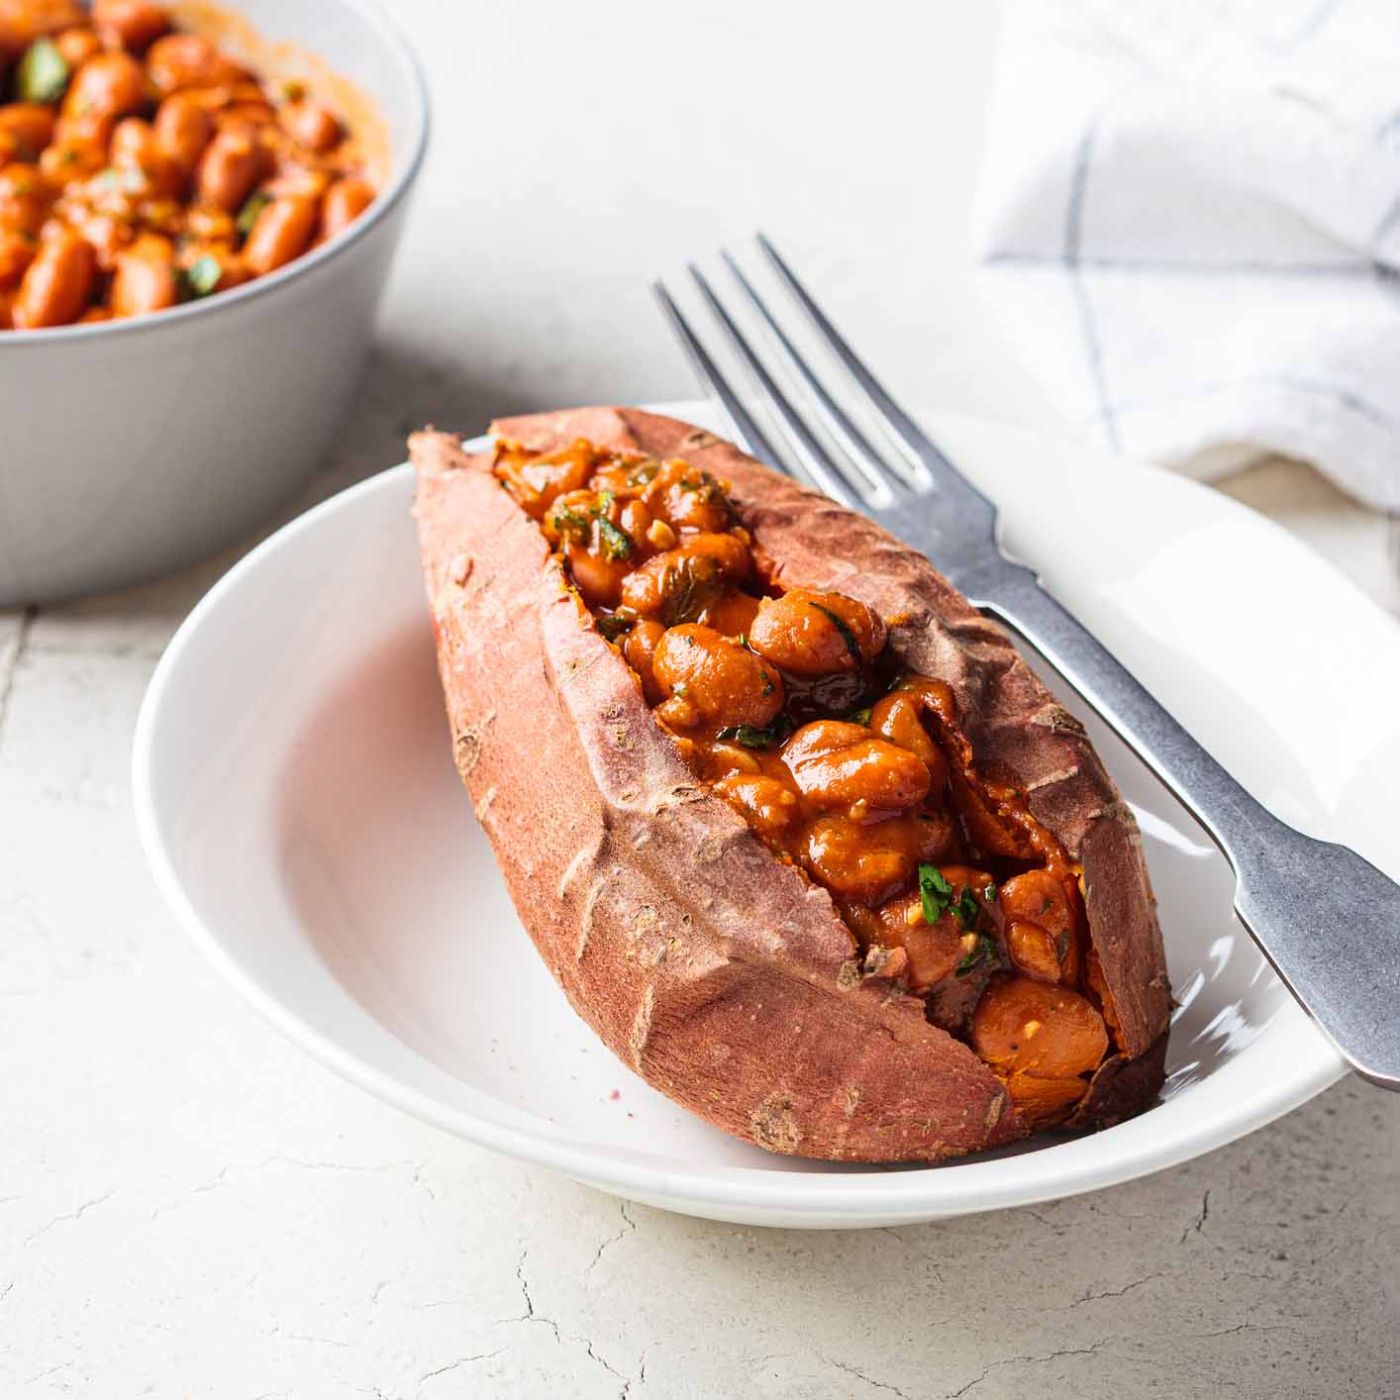 Baked-sweet-potato-stuffed-with-beans-in-tomato-sauce.-1406731164_2124x1416 square.jpeg